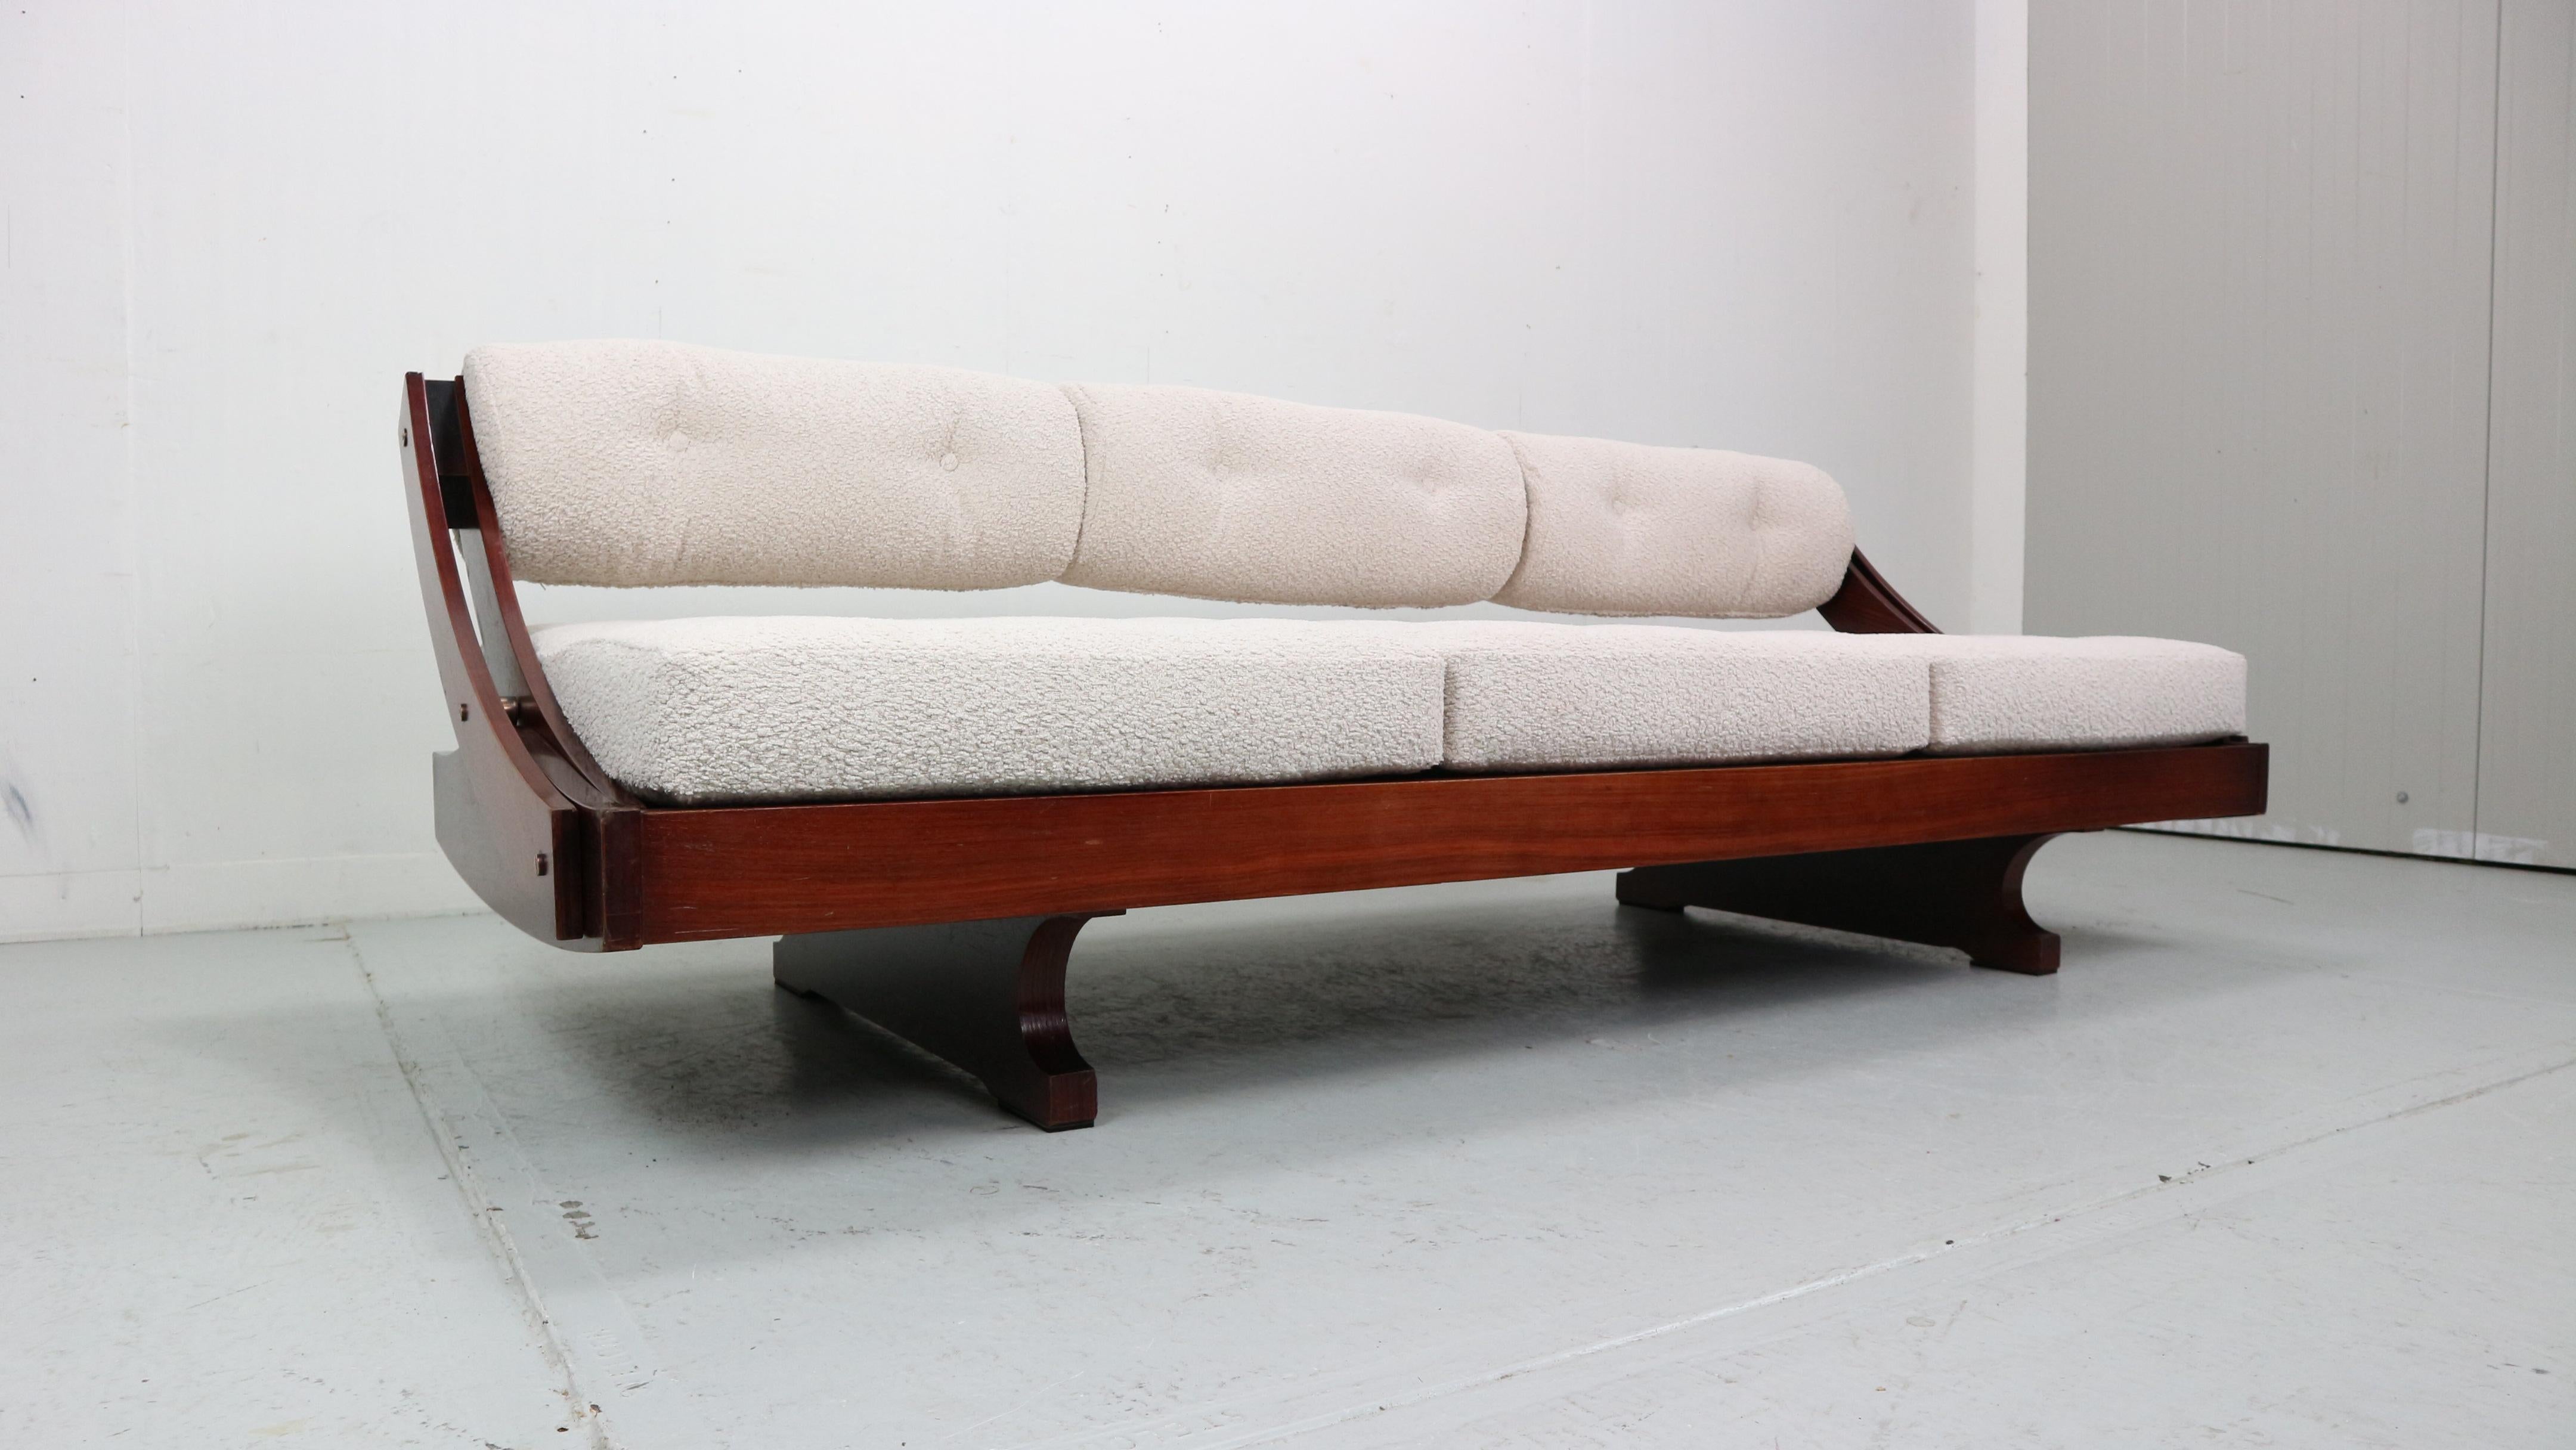 20th Century Gianni Songia Daybed Model GS 195 For Sormani, Italy, 1960s